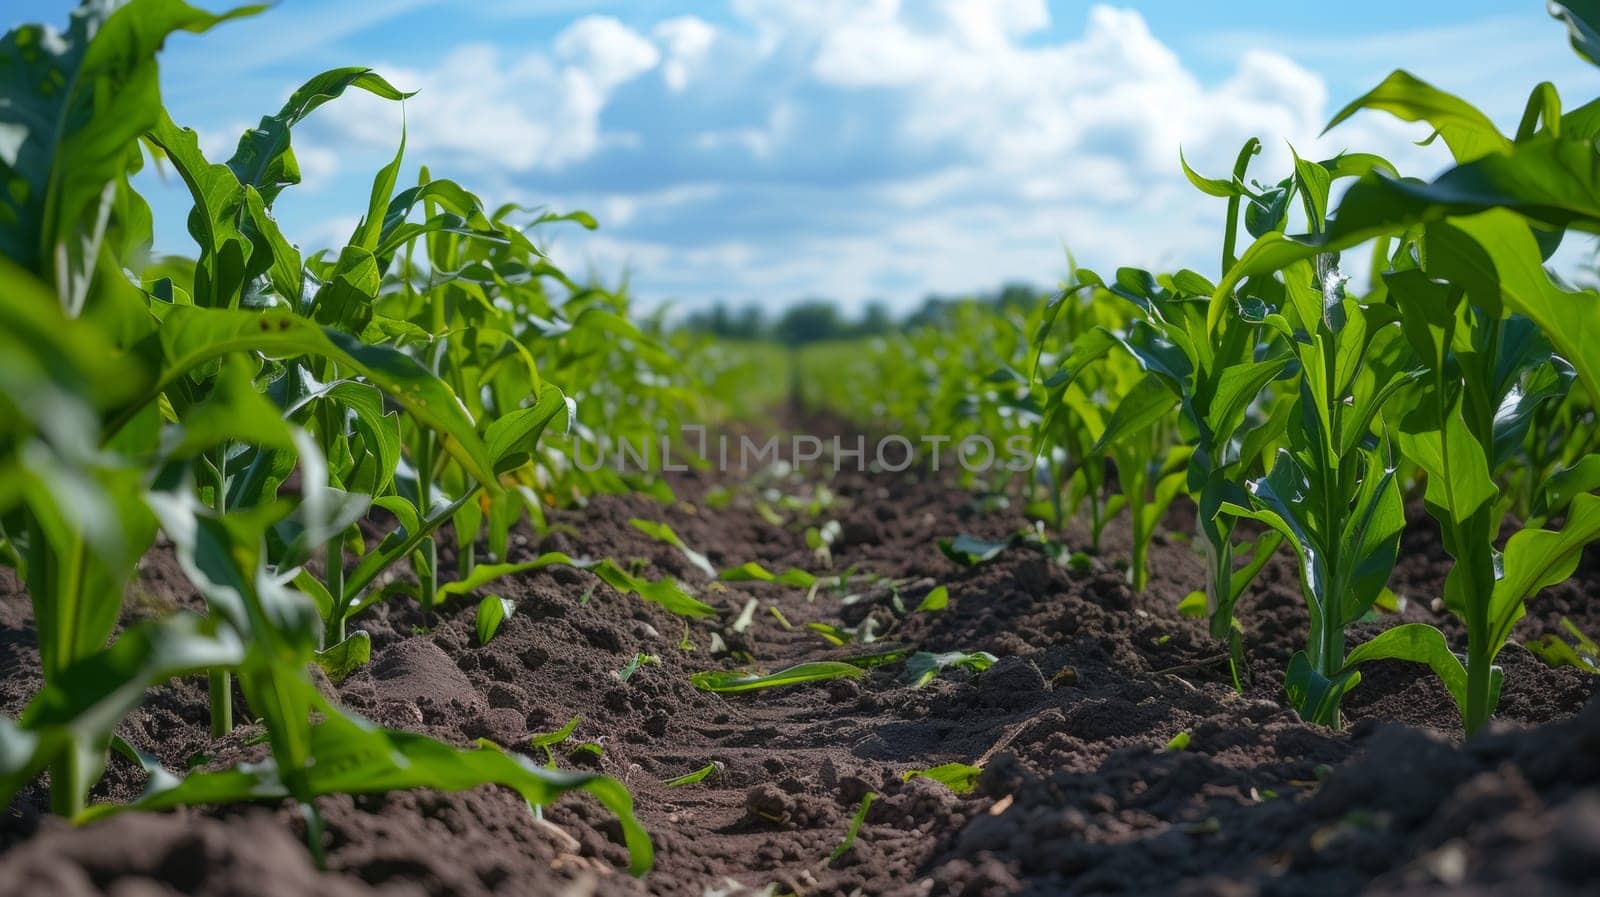 A field of corn plants growing in the dirt with clouds above